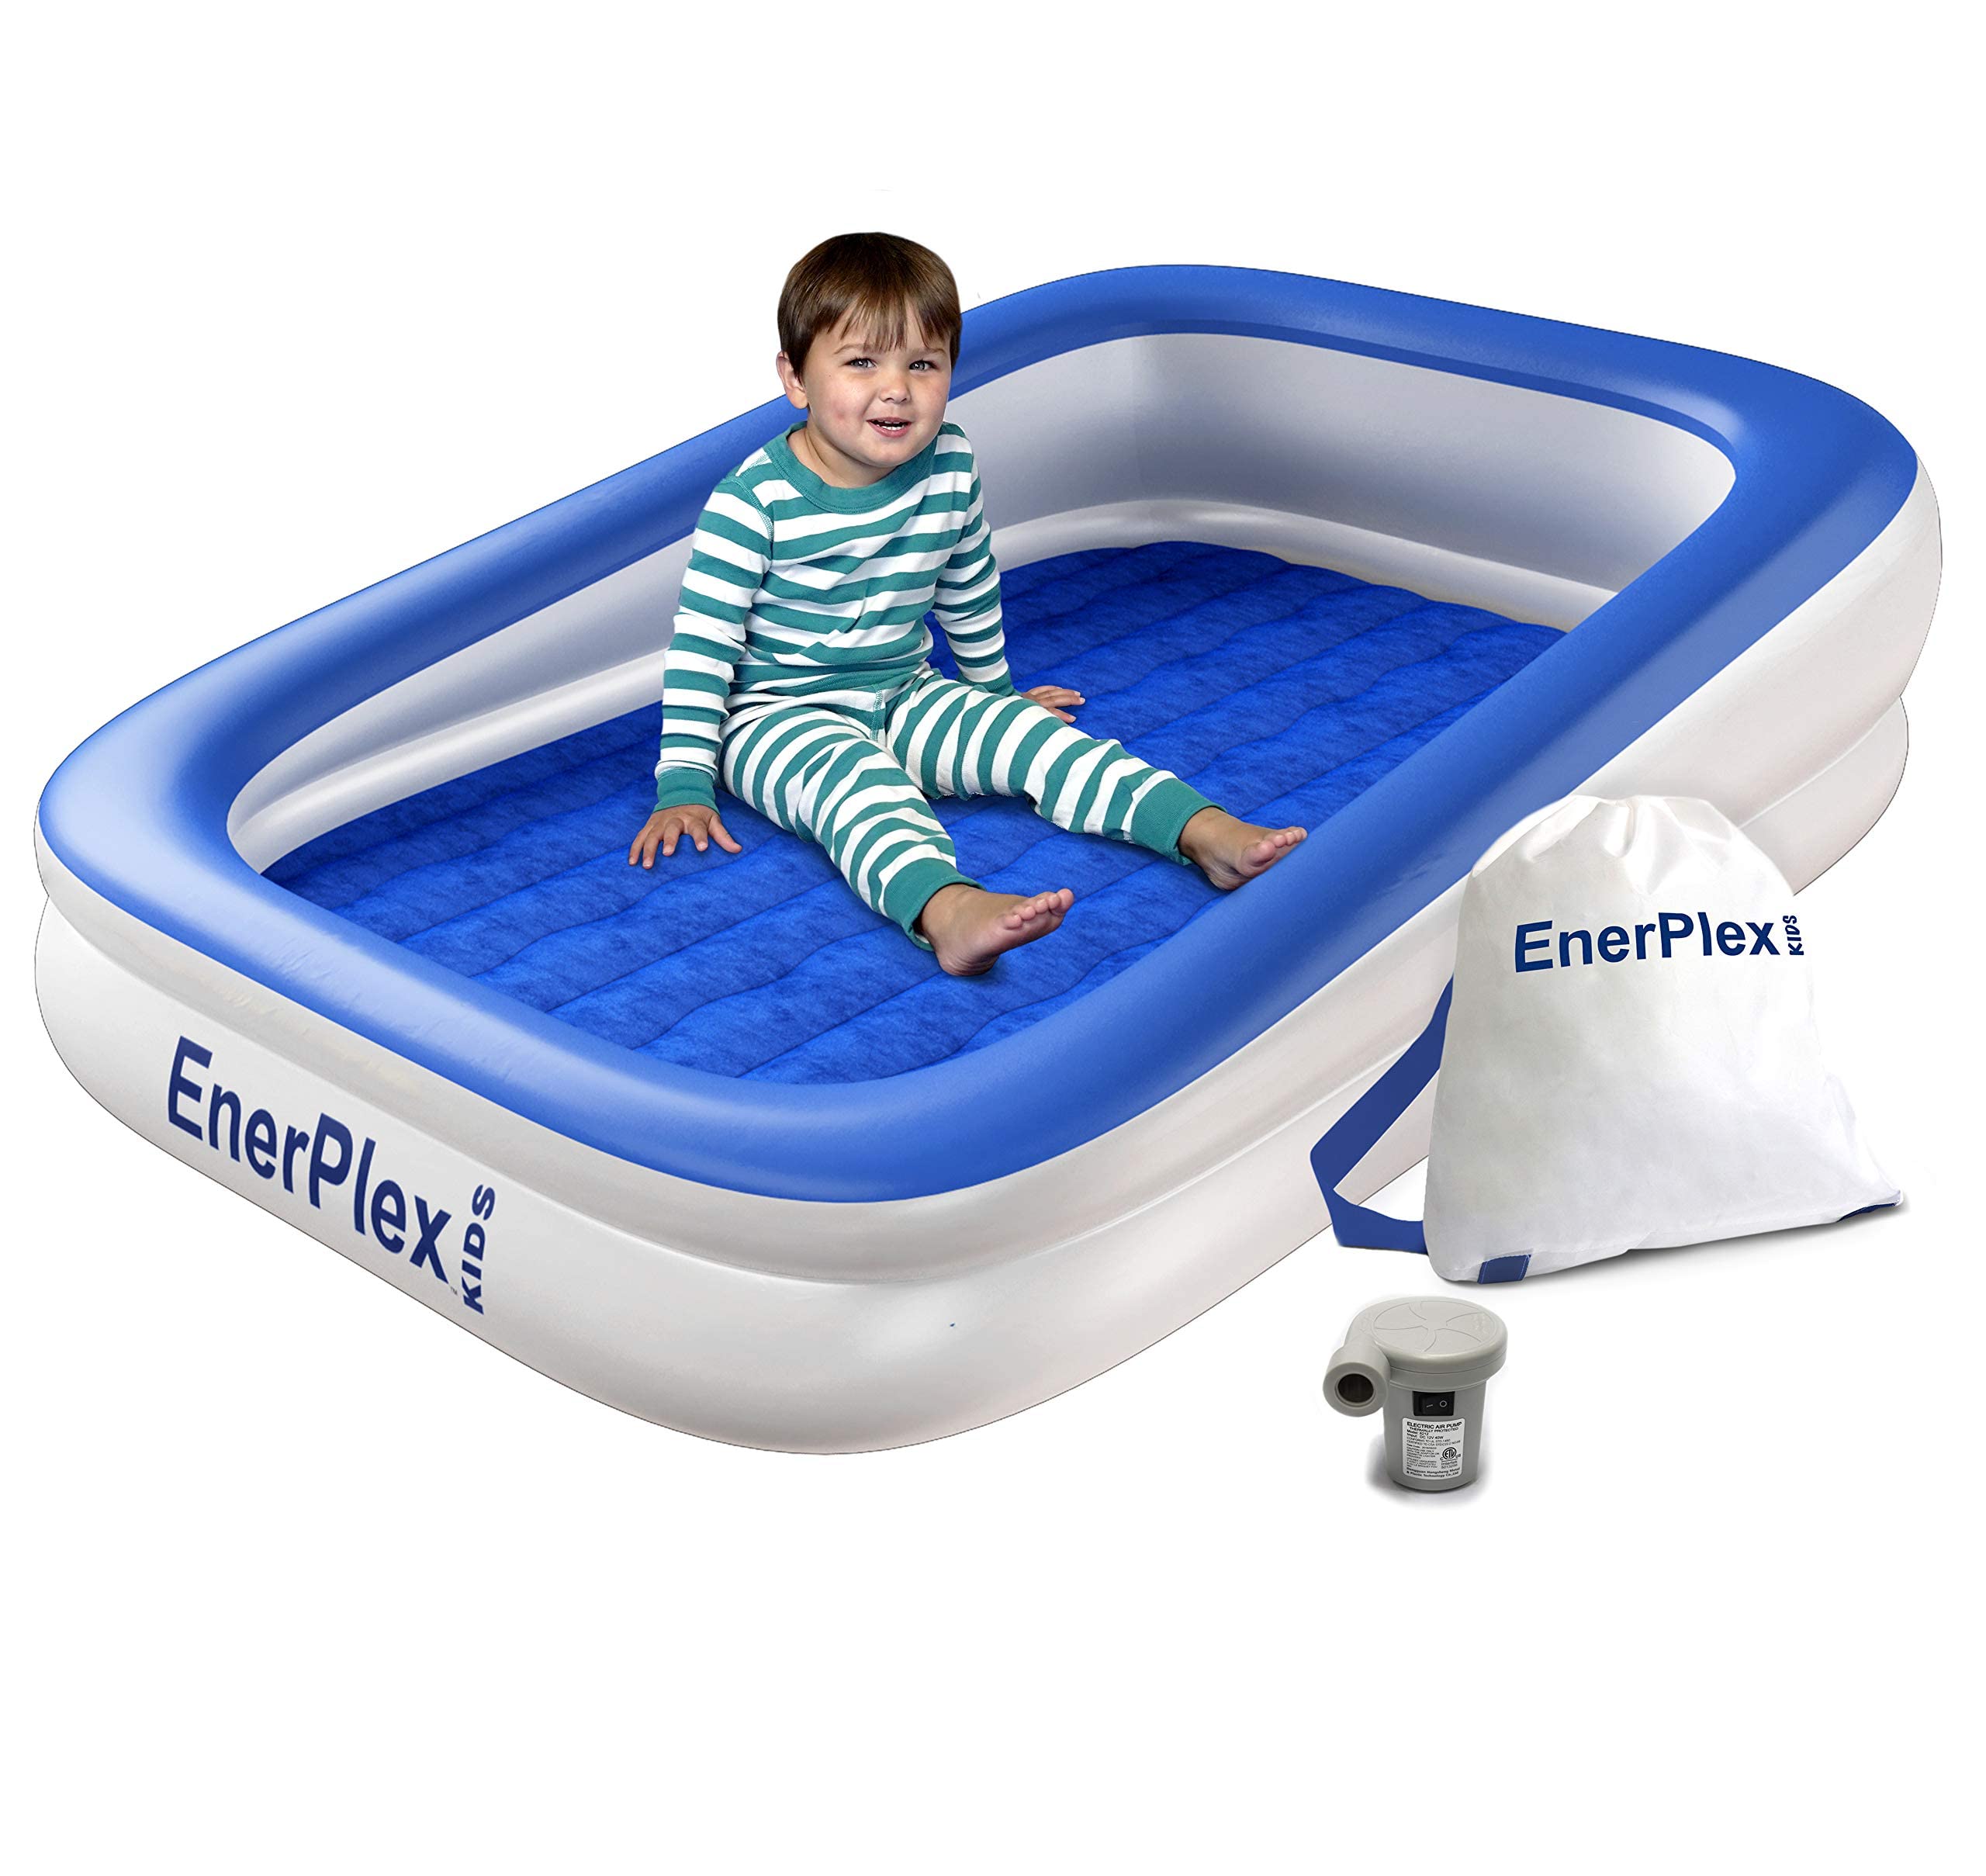 EnerPlex Kids Inflatable Travel Bed with High Speed Pump, Portable Blow up Toddler Air Mattress with Sides - Built-in Safety Bum